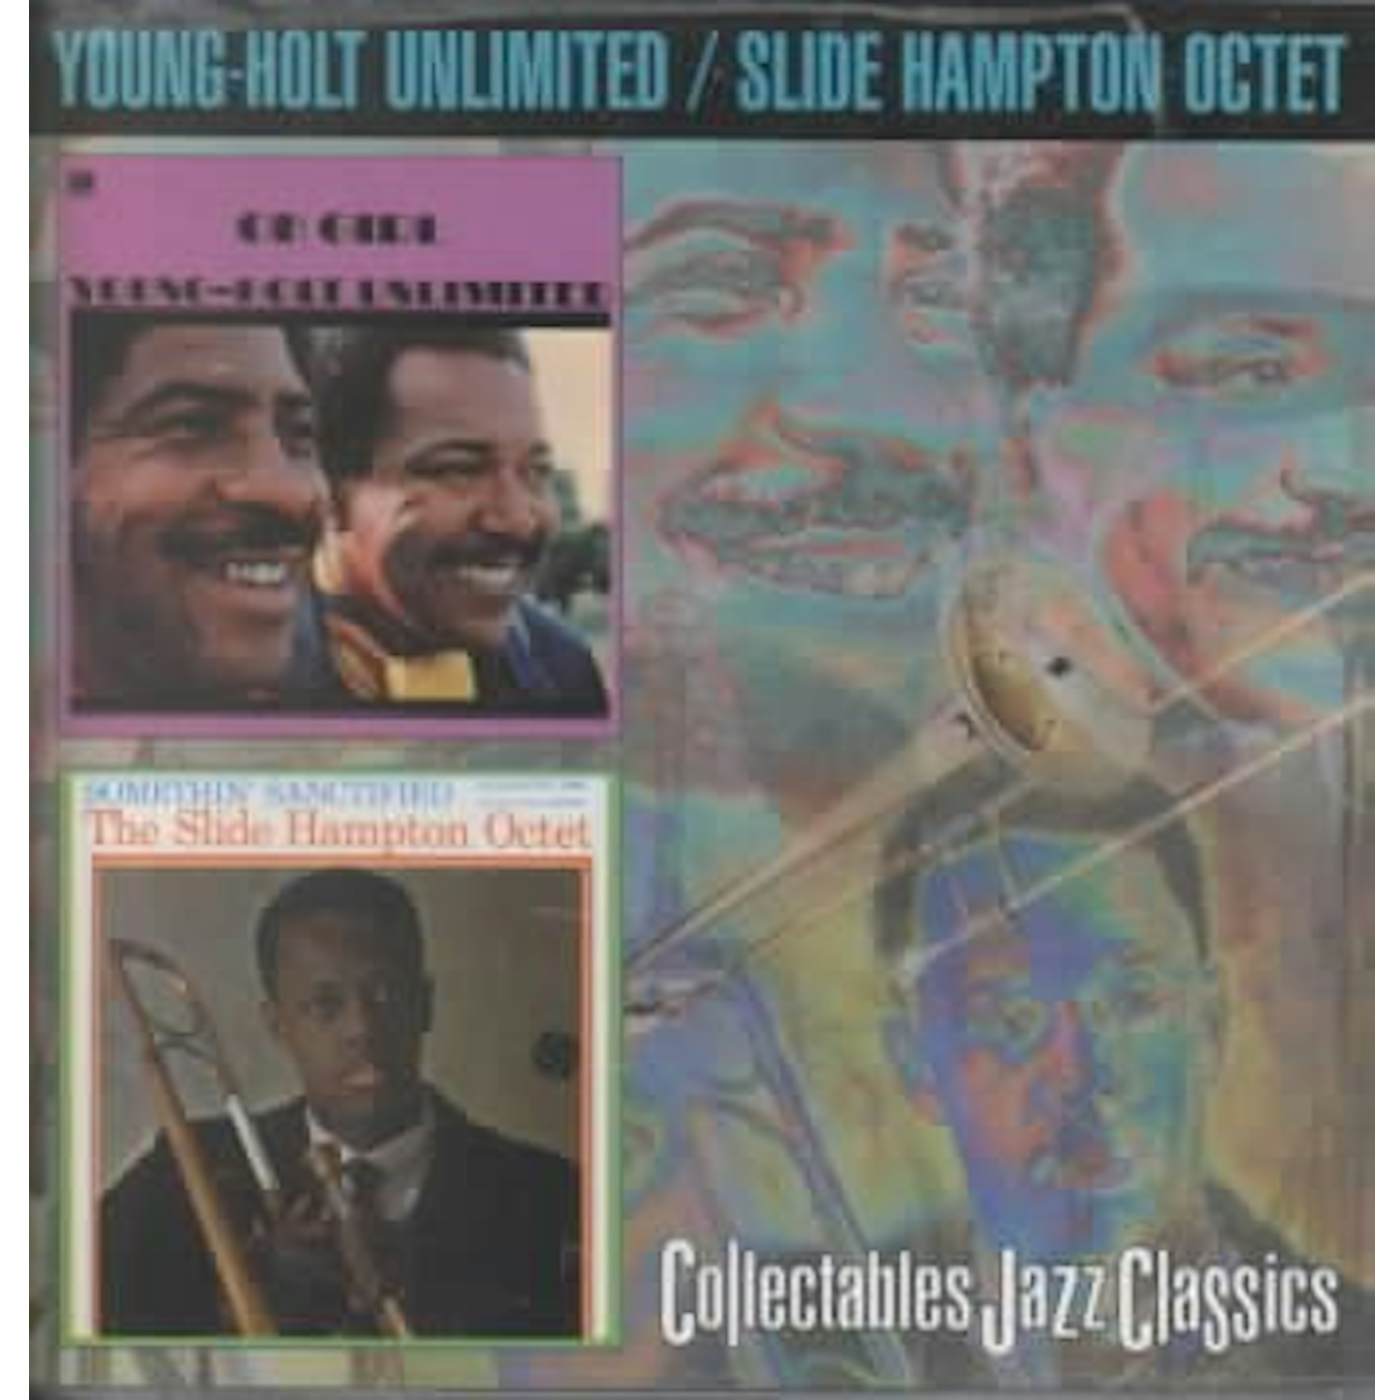 Young-Holt Unlimited Oh Girl: Somethin Sanctified CD